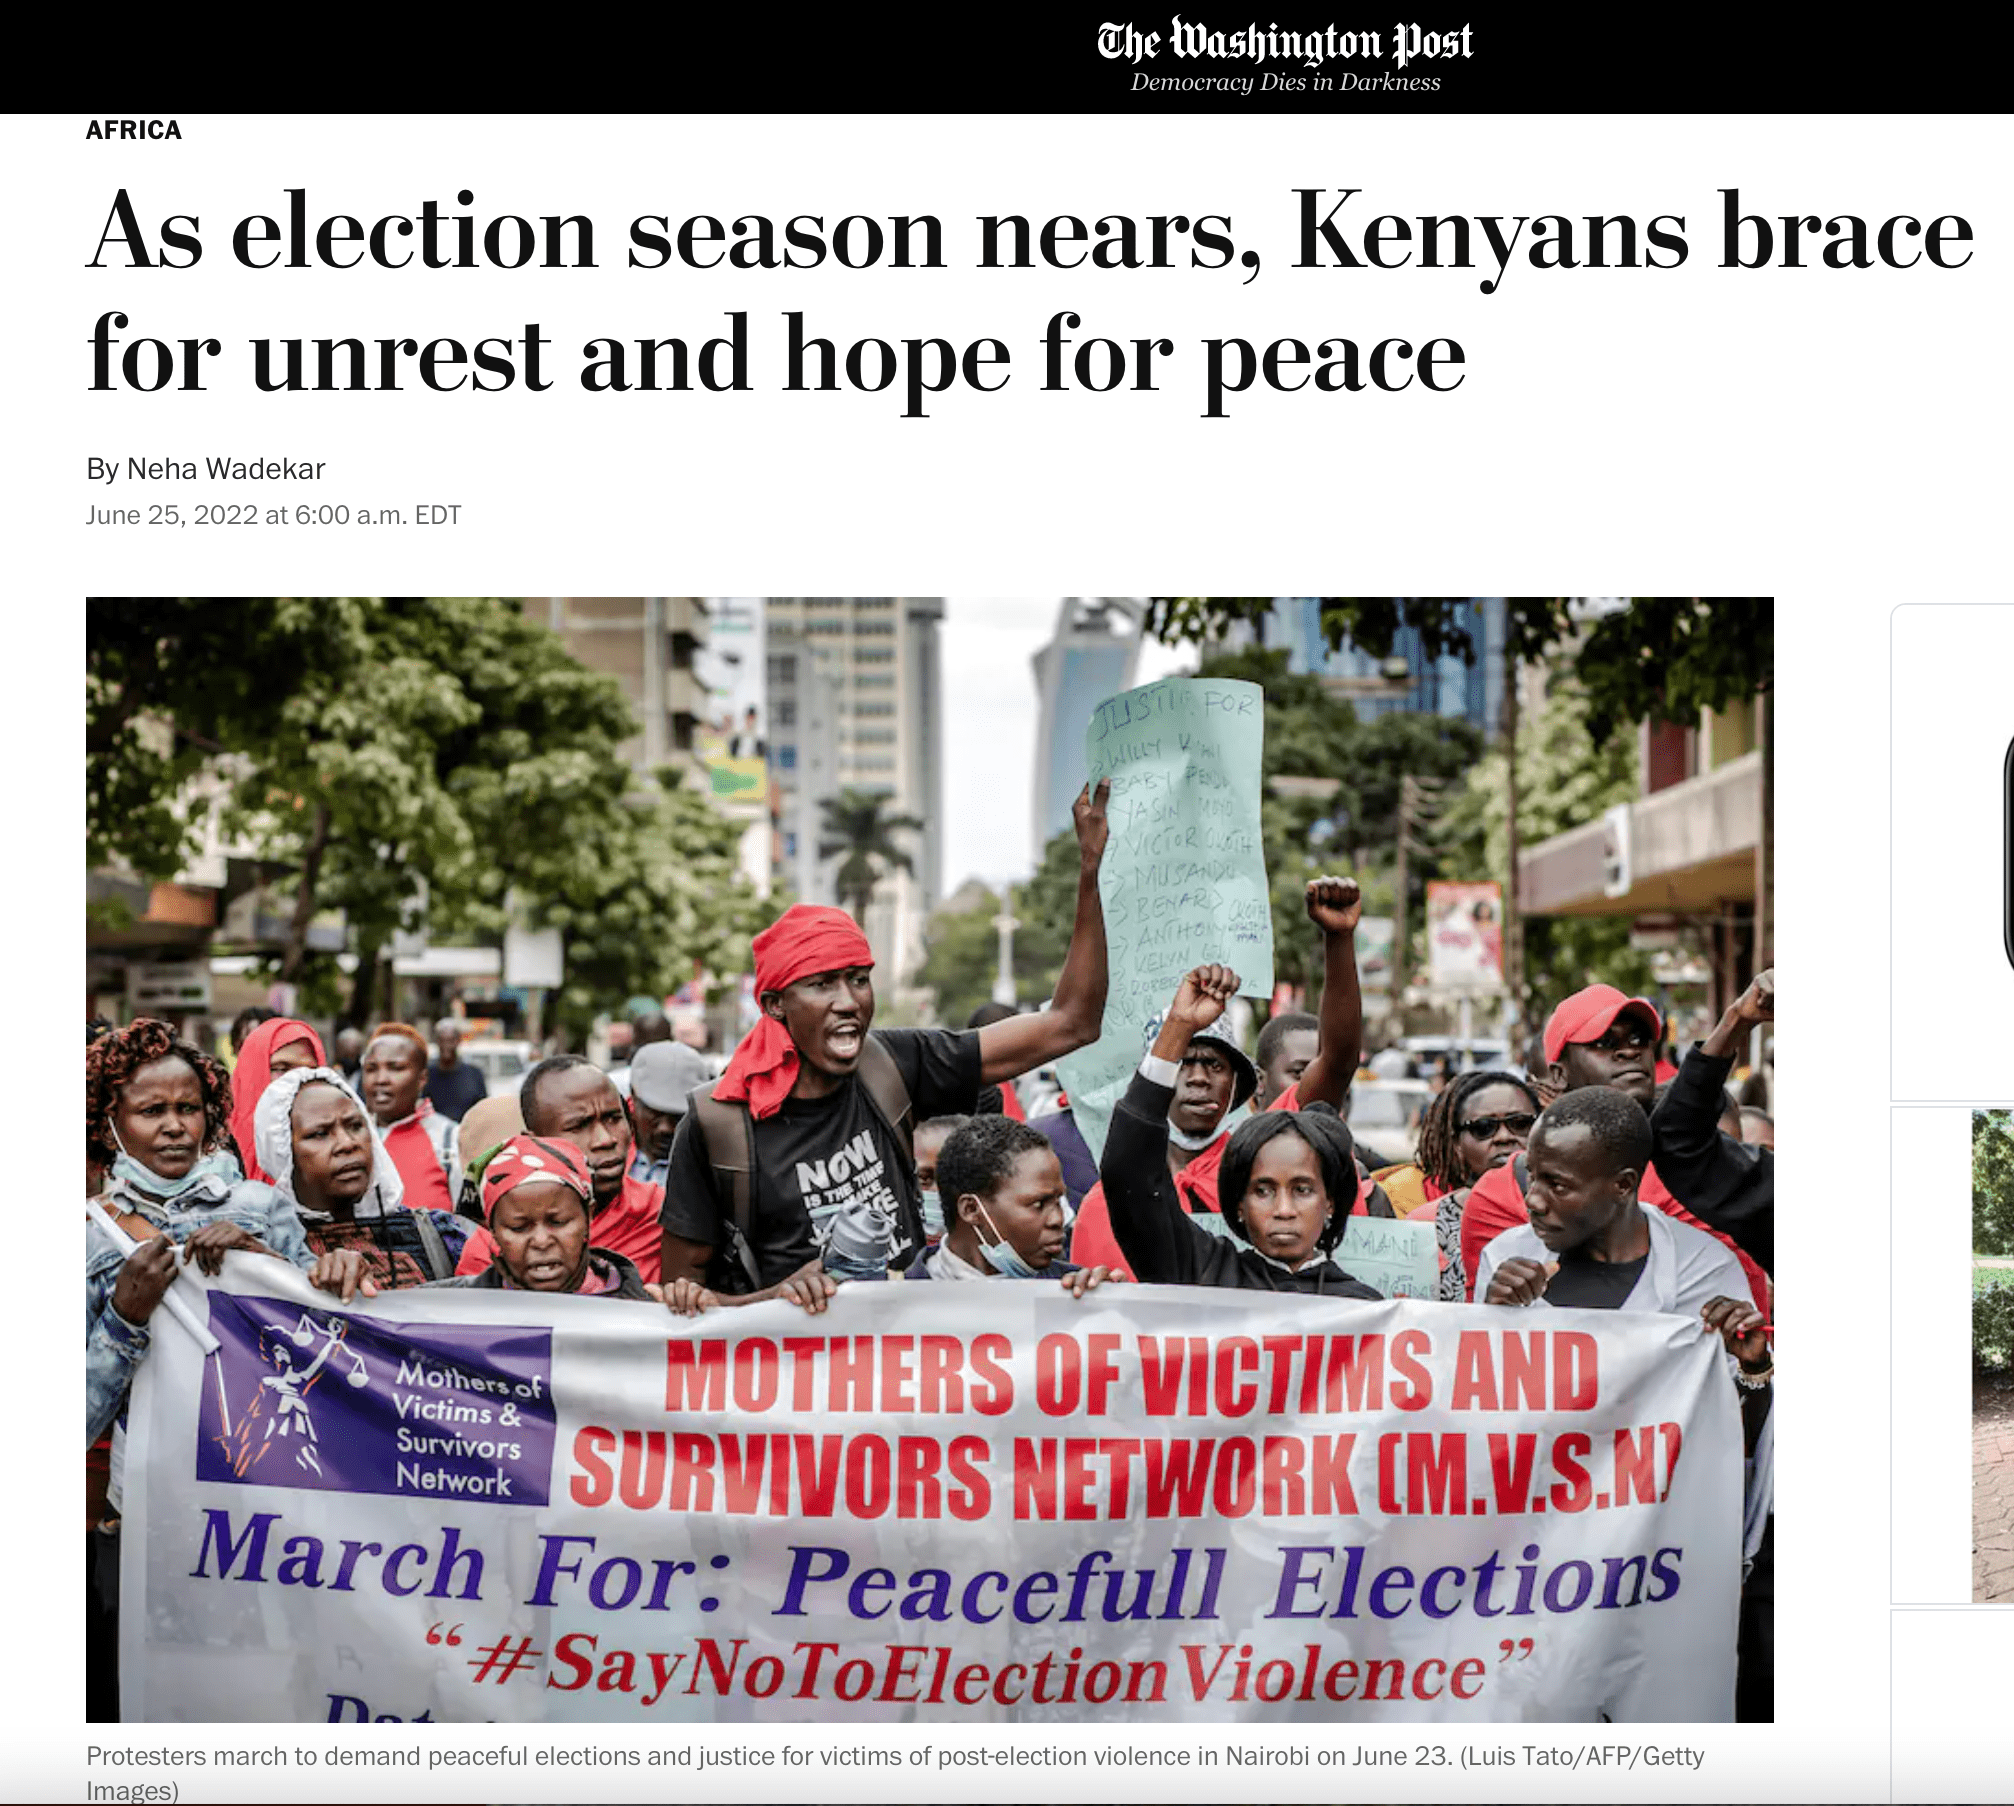 As election season nears, Kenyans brace for unrest and hope for peace – The Washington Post (image)